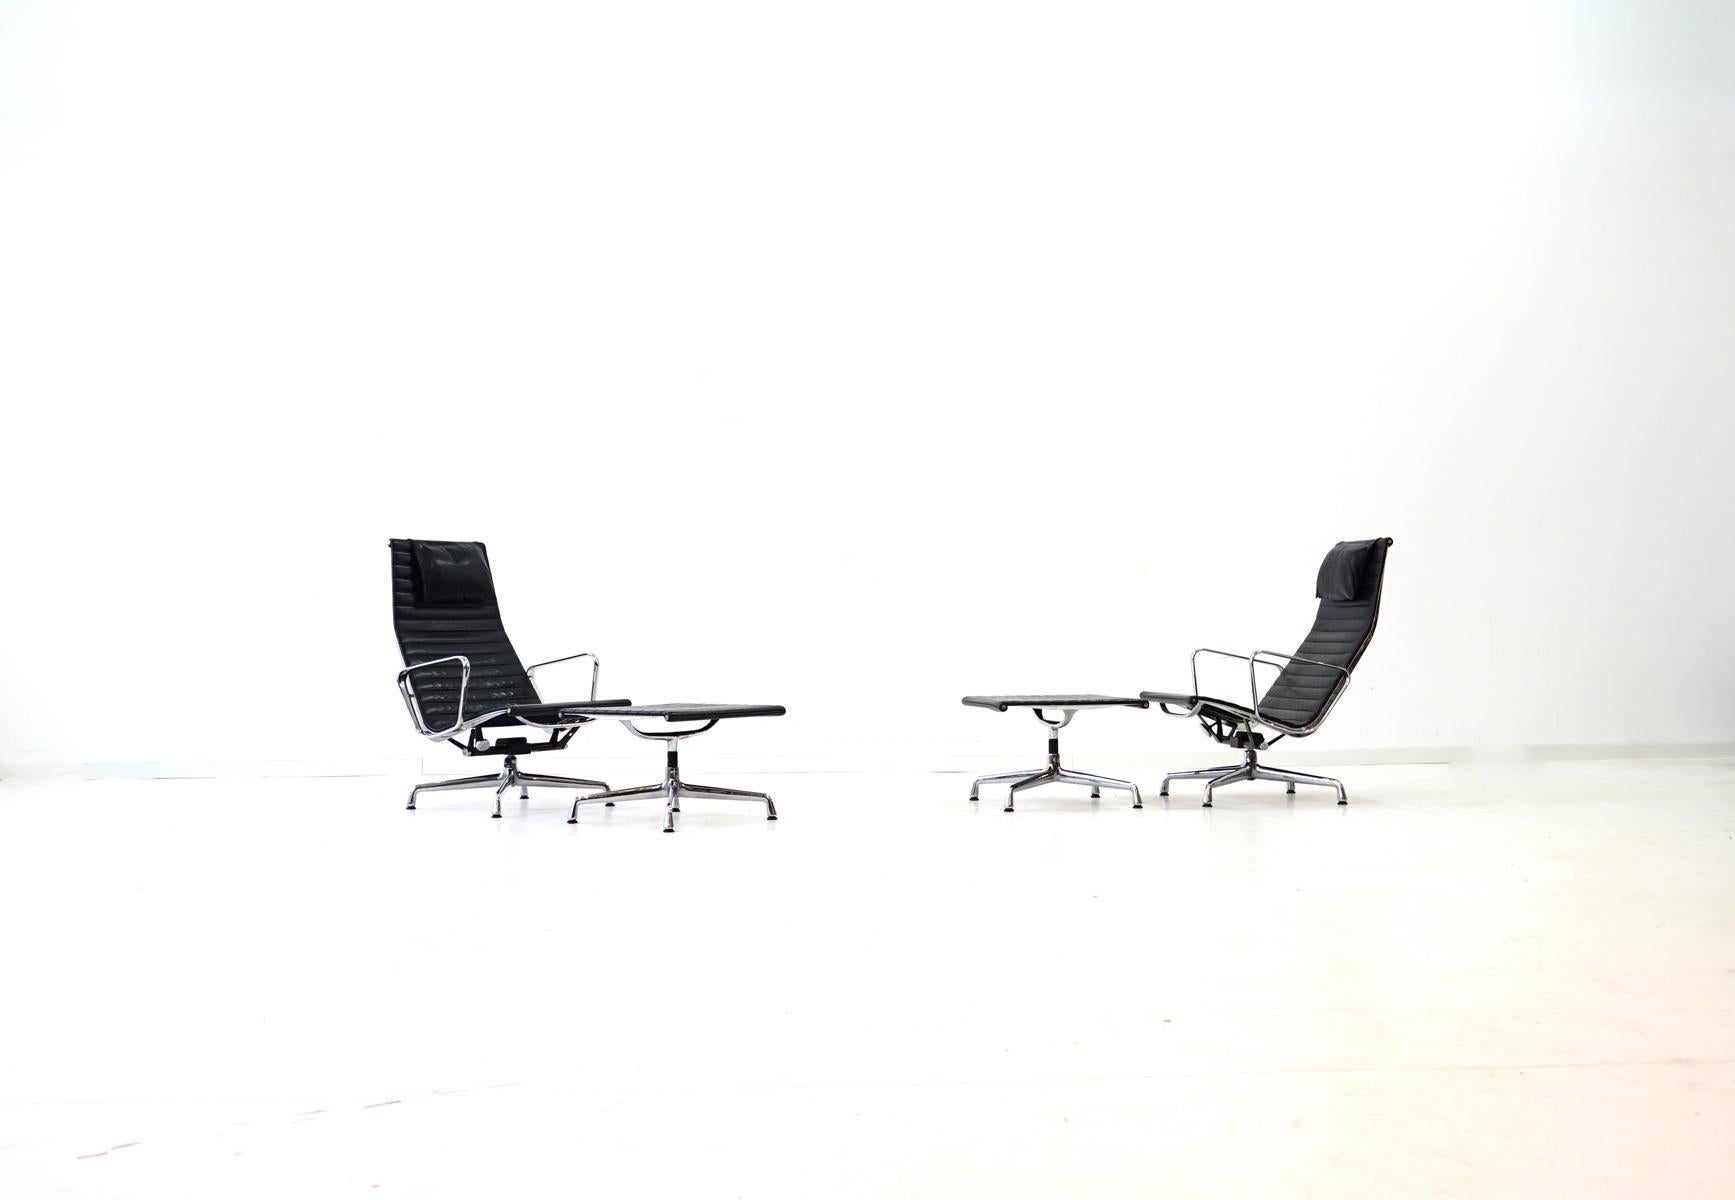 EA 124 + EA 125 Vitra black leather lounge chair by Charles & Ray Eames
Set of one chair + one ottomane. The black leather Aluminum Chair EA 124 and Ottoman 125 is the purist lounge chair in the Aluminum Group by Charles & Ray Eames. Thanks to its